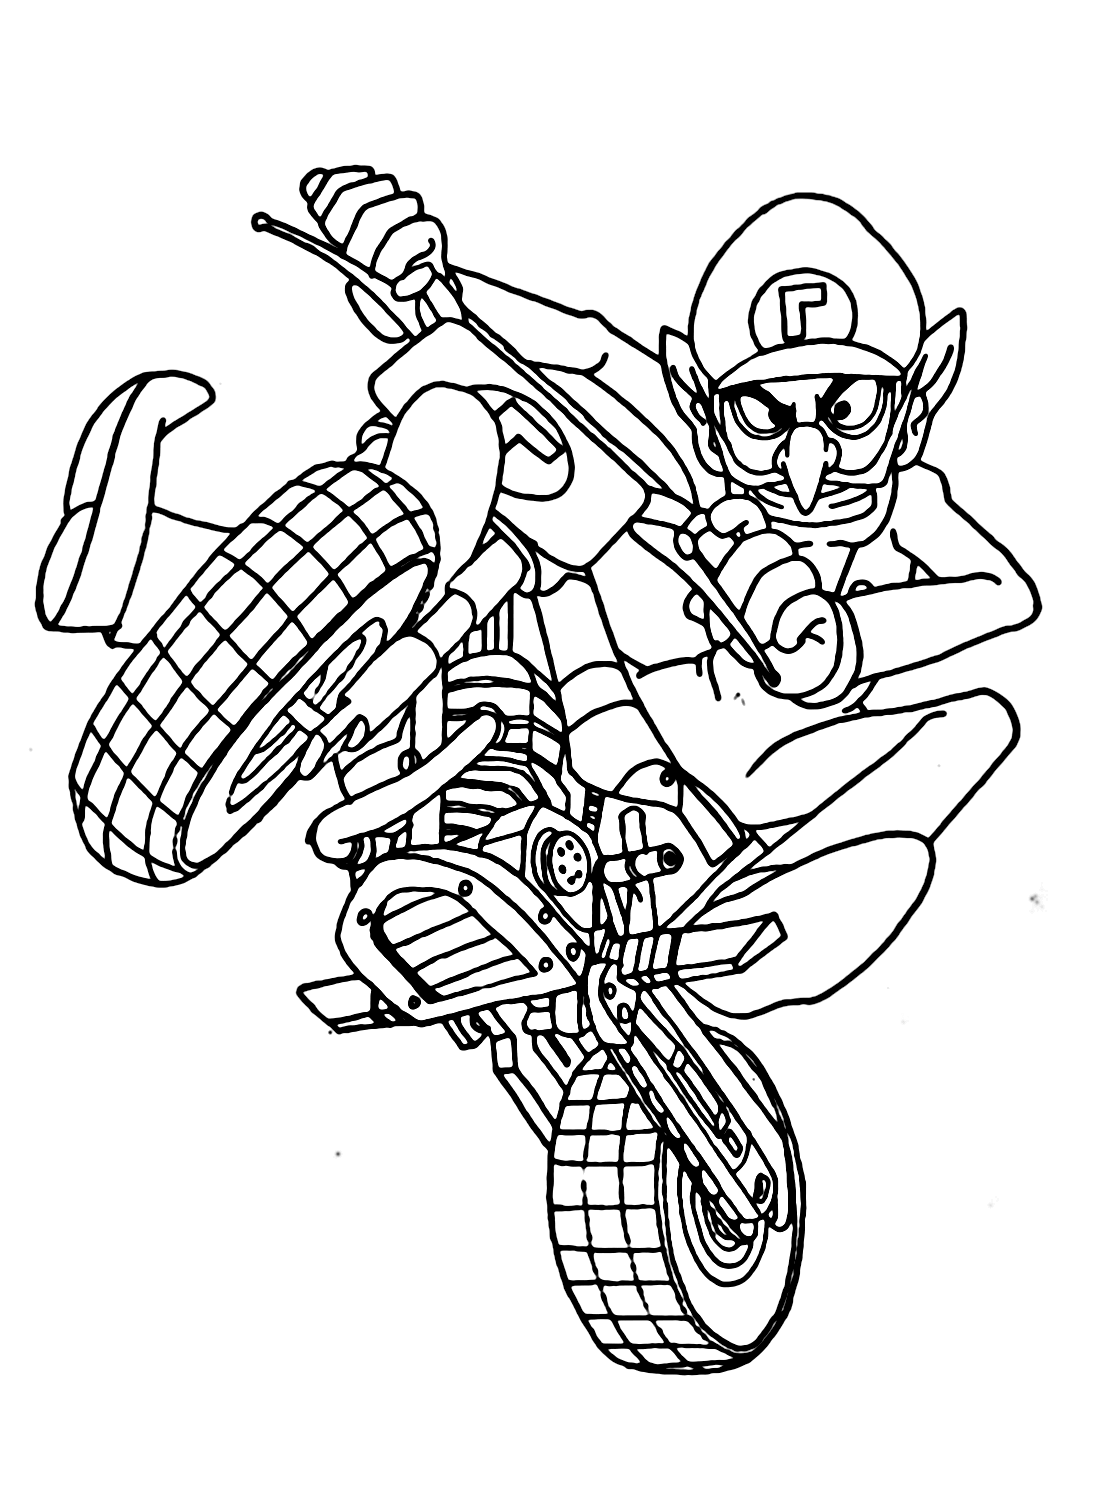 Waluigi with Motorcycle Coloring Page